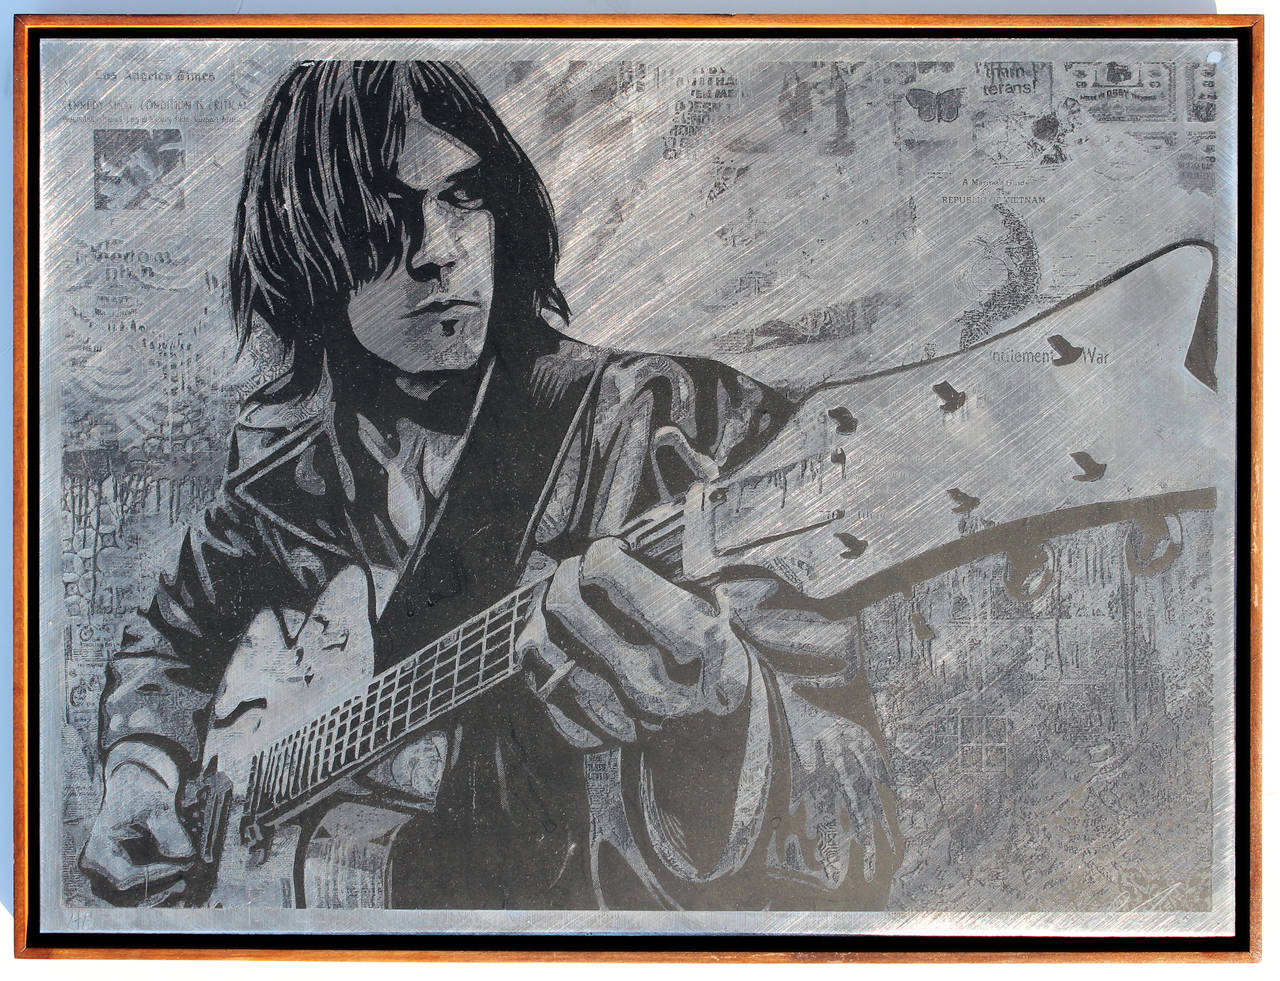 Neal Young Metal - Print by Shepard Fairey